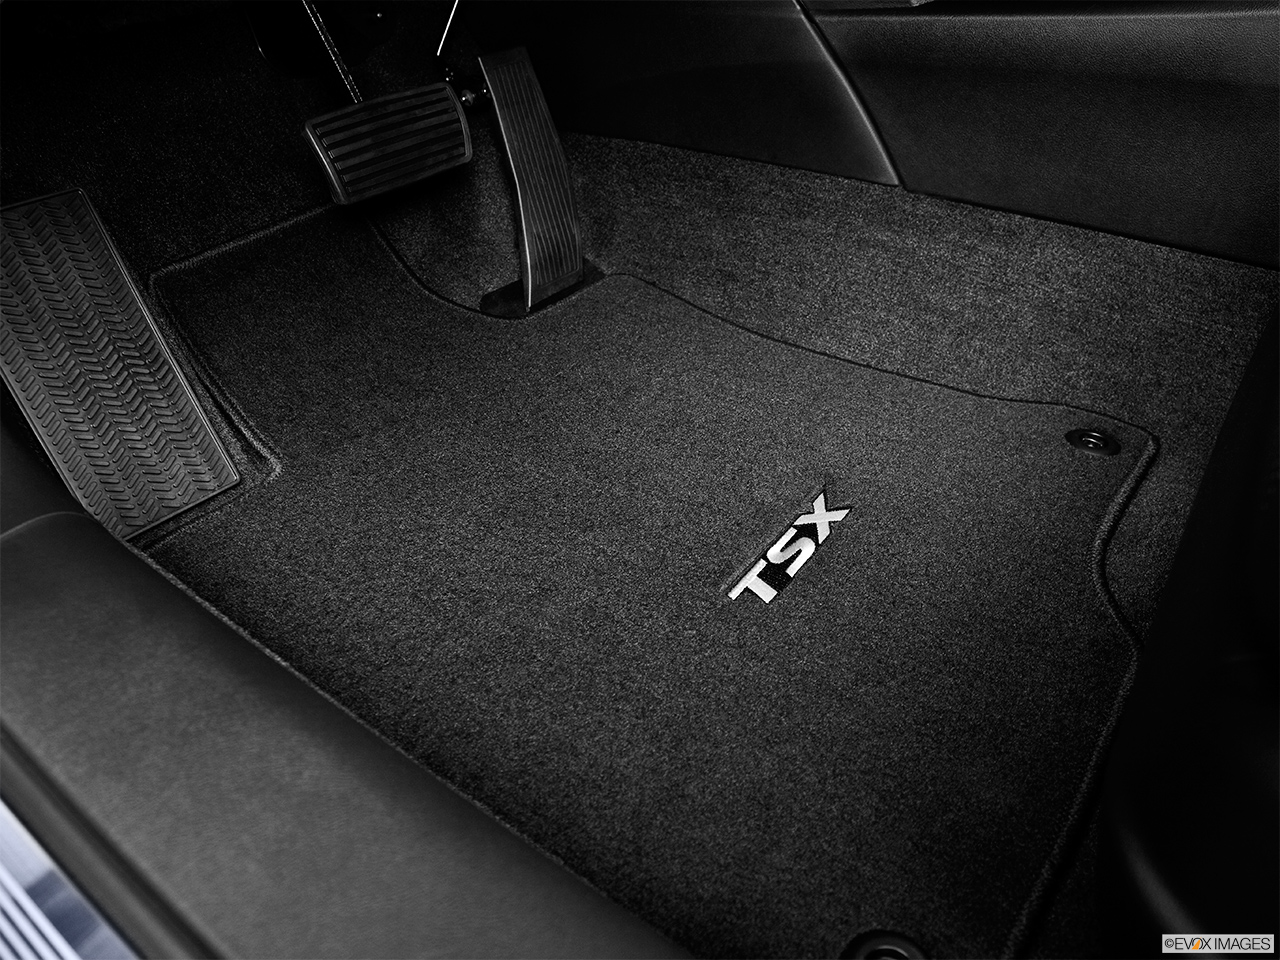 2014 Acura TSX Sport Wagon Base Driver's floor mat and pedals. Mid-seat level from outside looking in. 